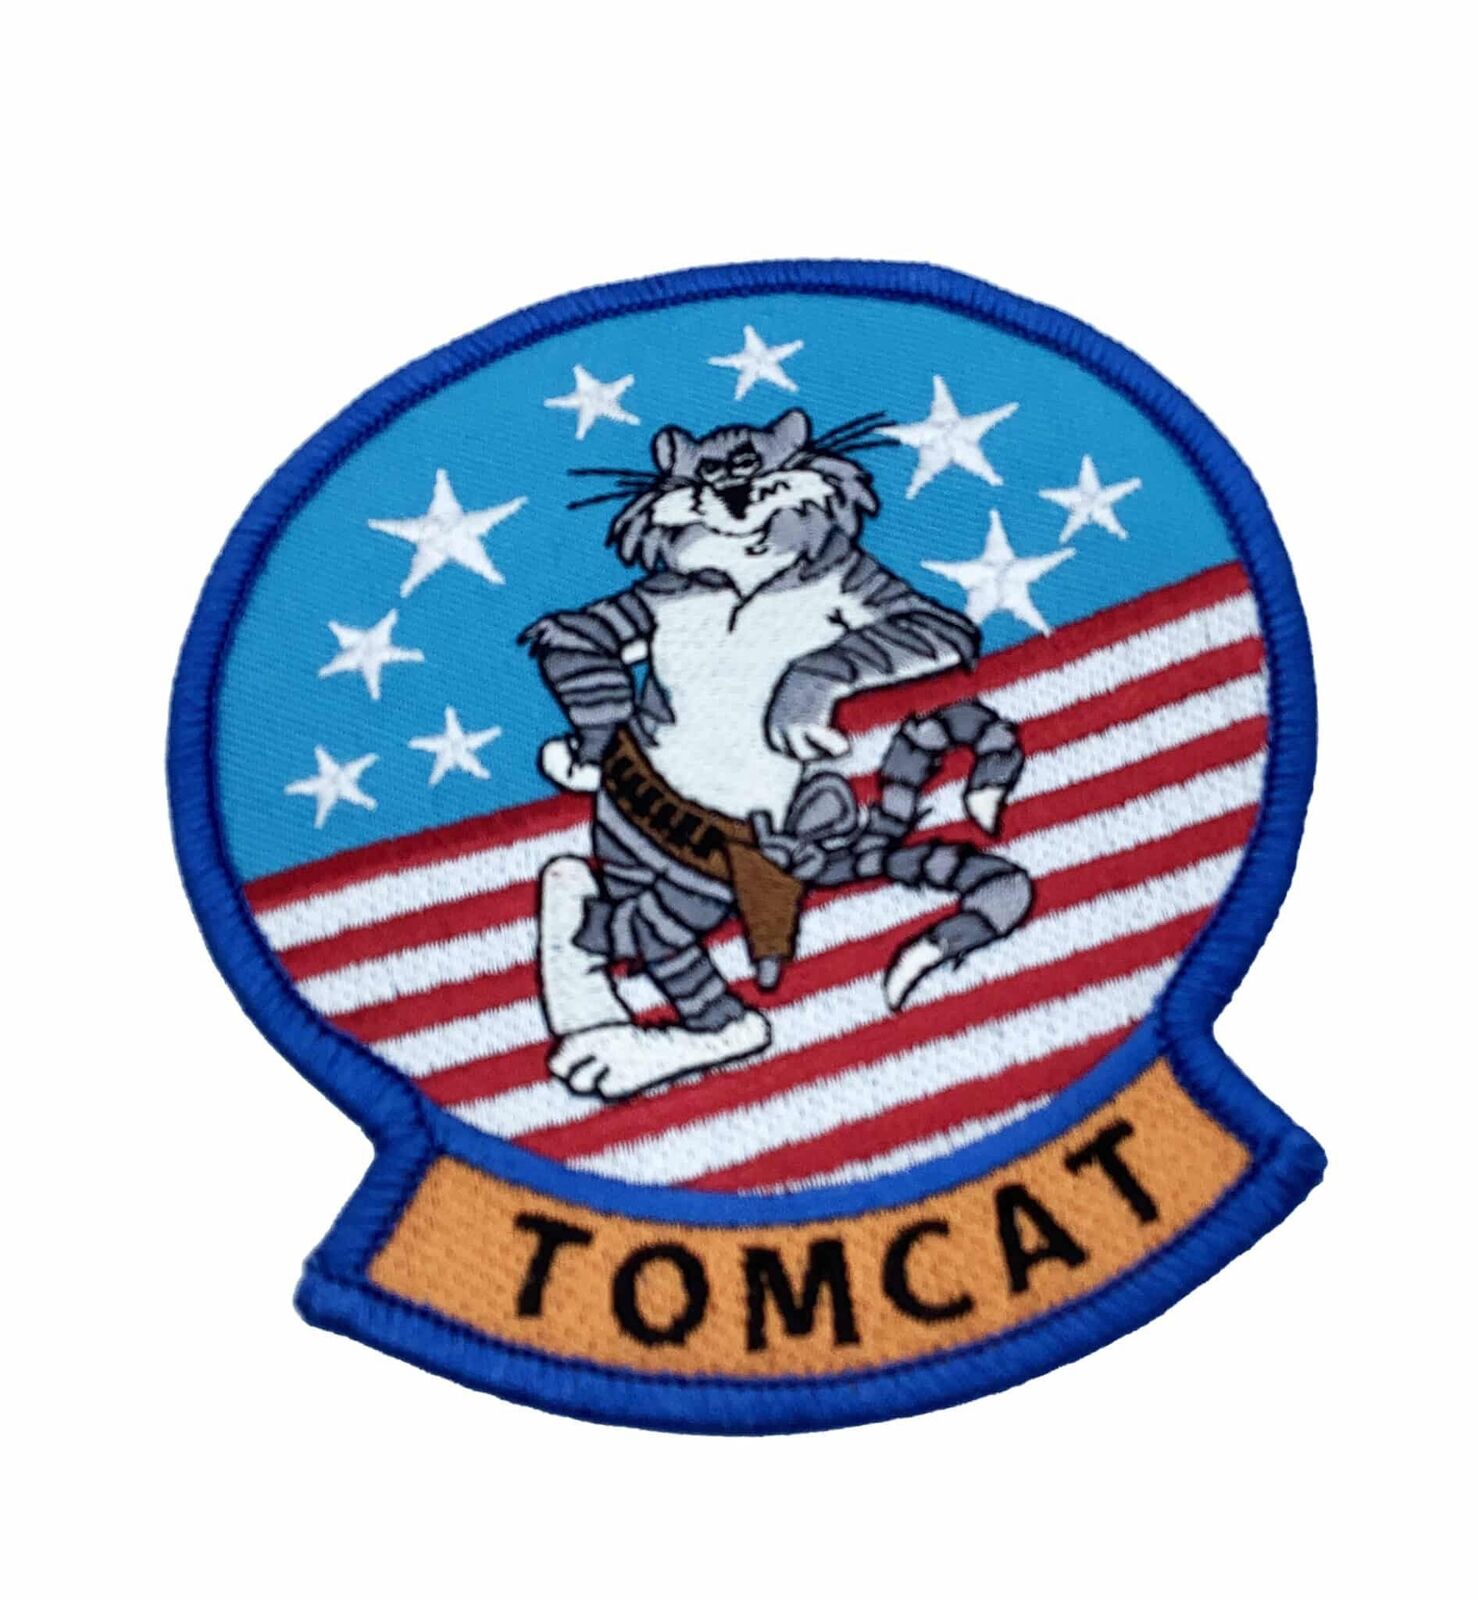 Tomcat 'Anytime Baby' Patch – Plastic Backing